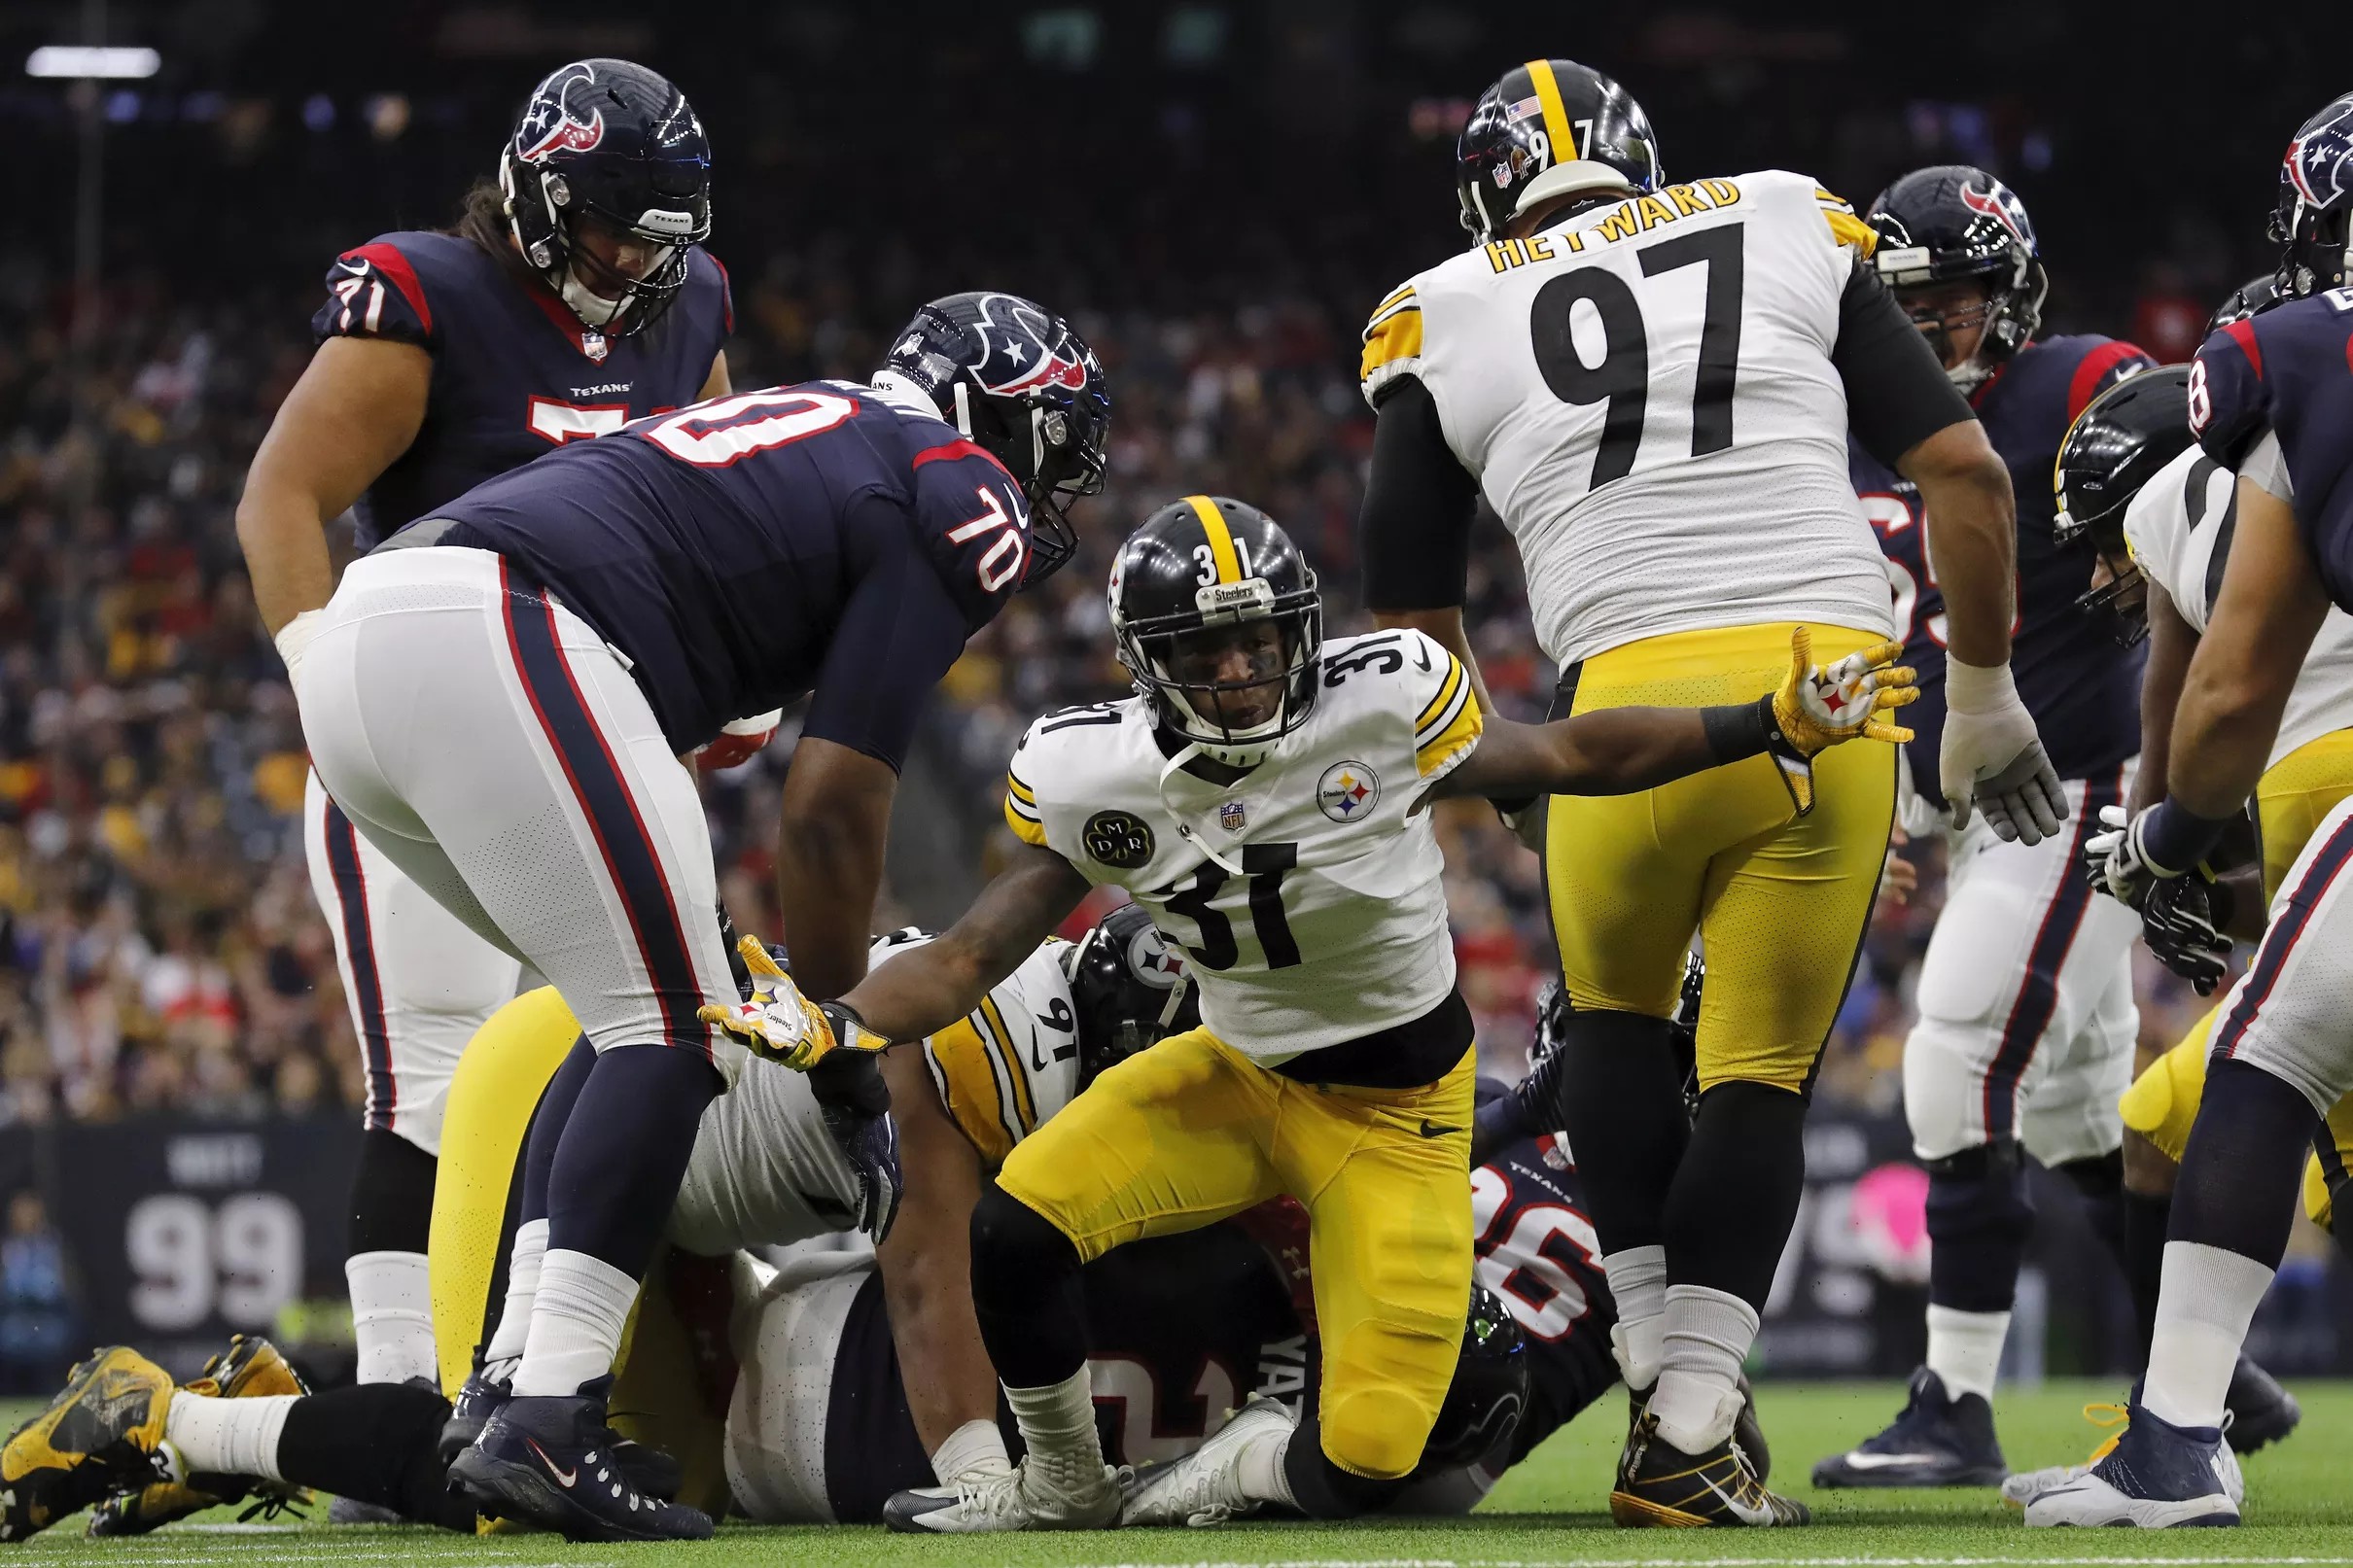 Steelers vs. Texans 5 Winners and 1 Loser in the Steelers’ win over